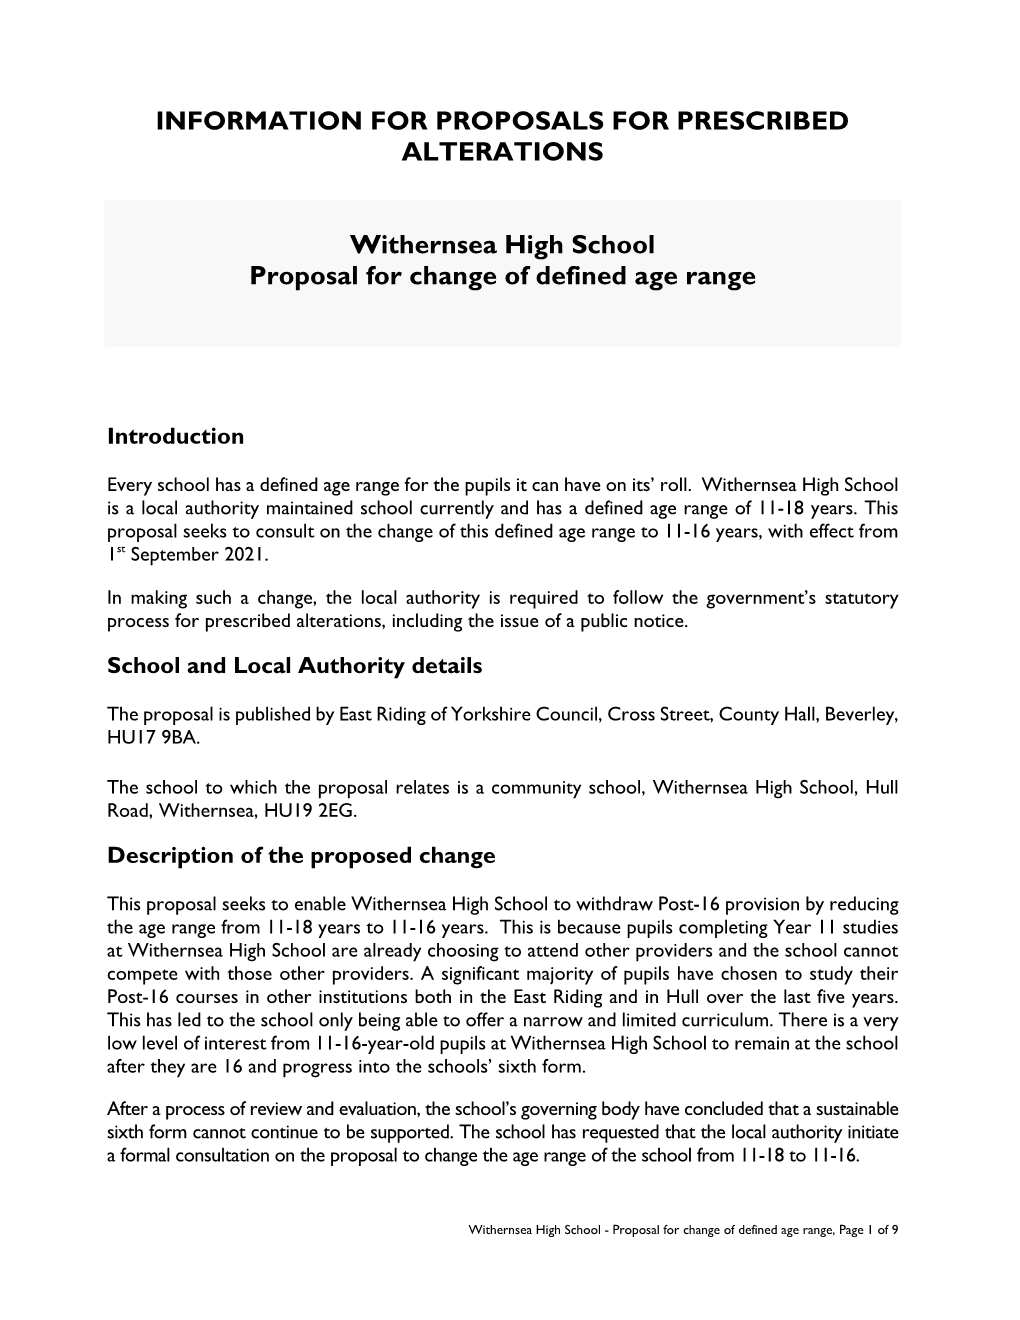 Withernsea High School Proposal for Change of Defined Age Range